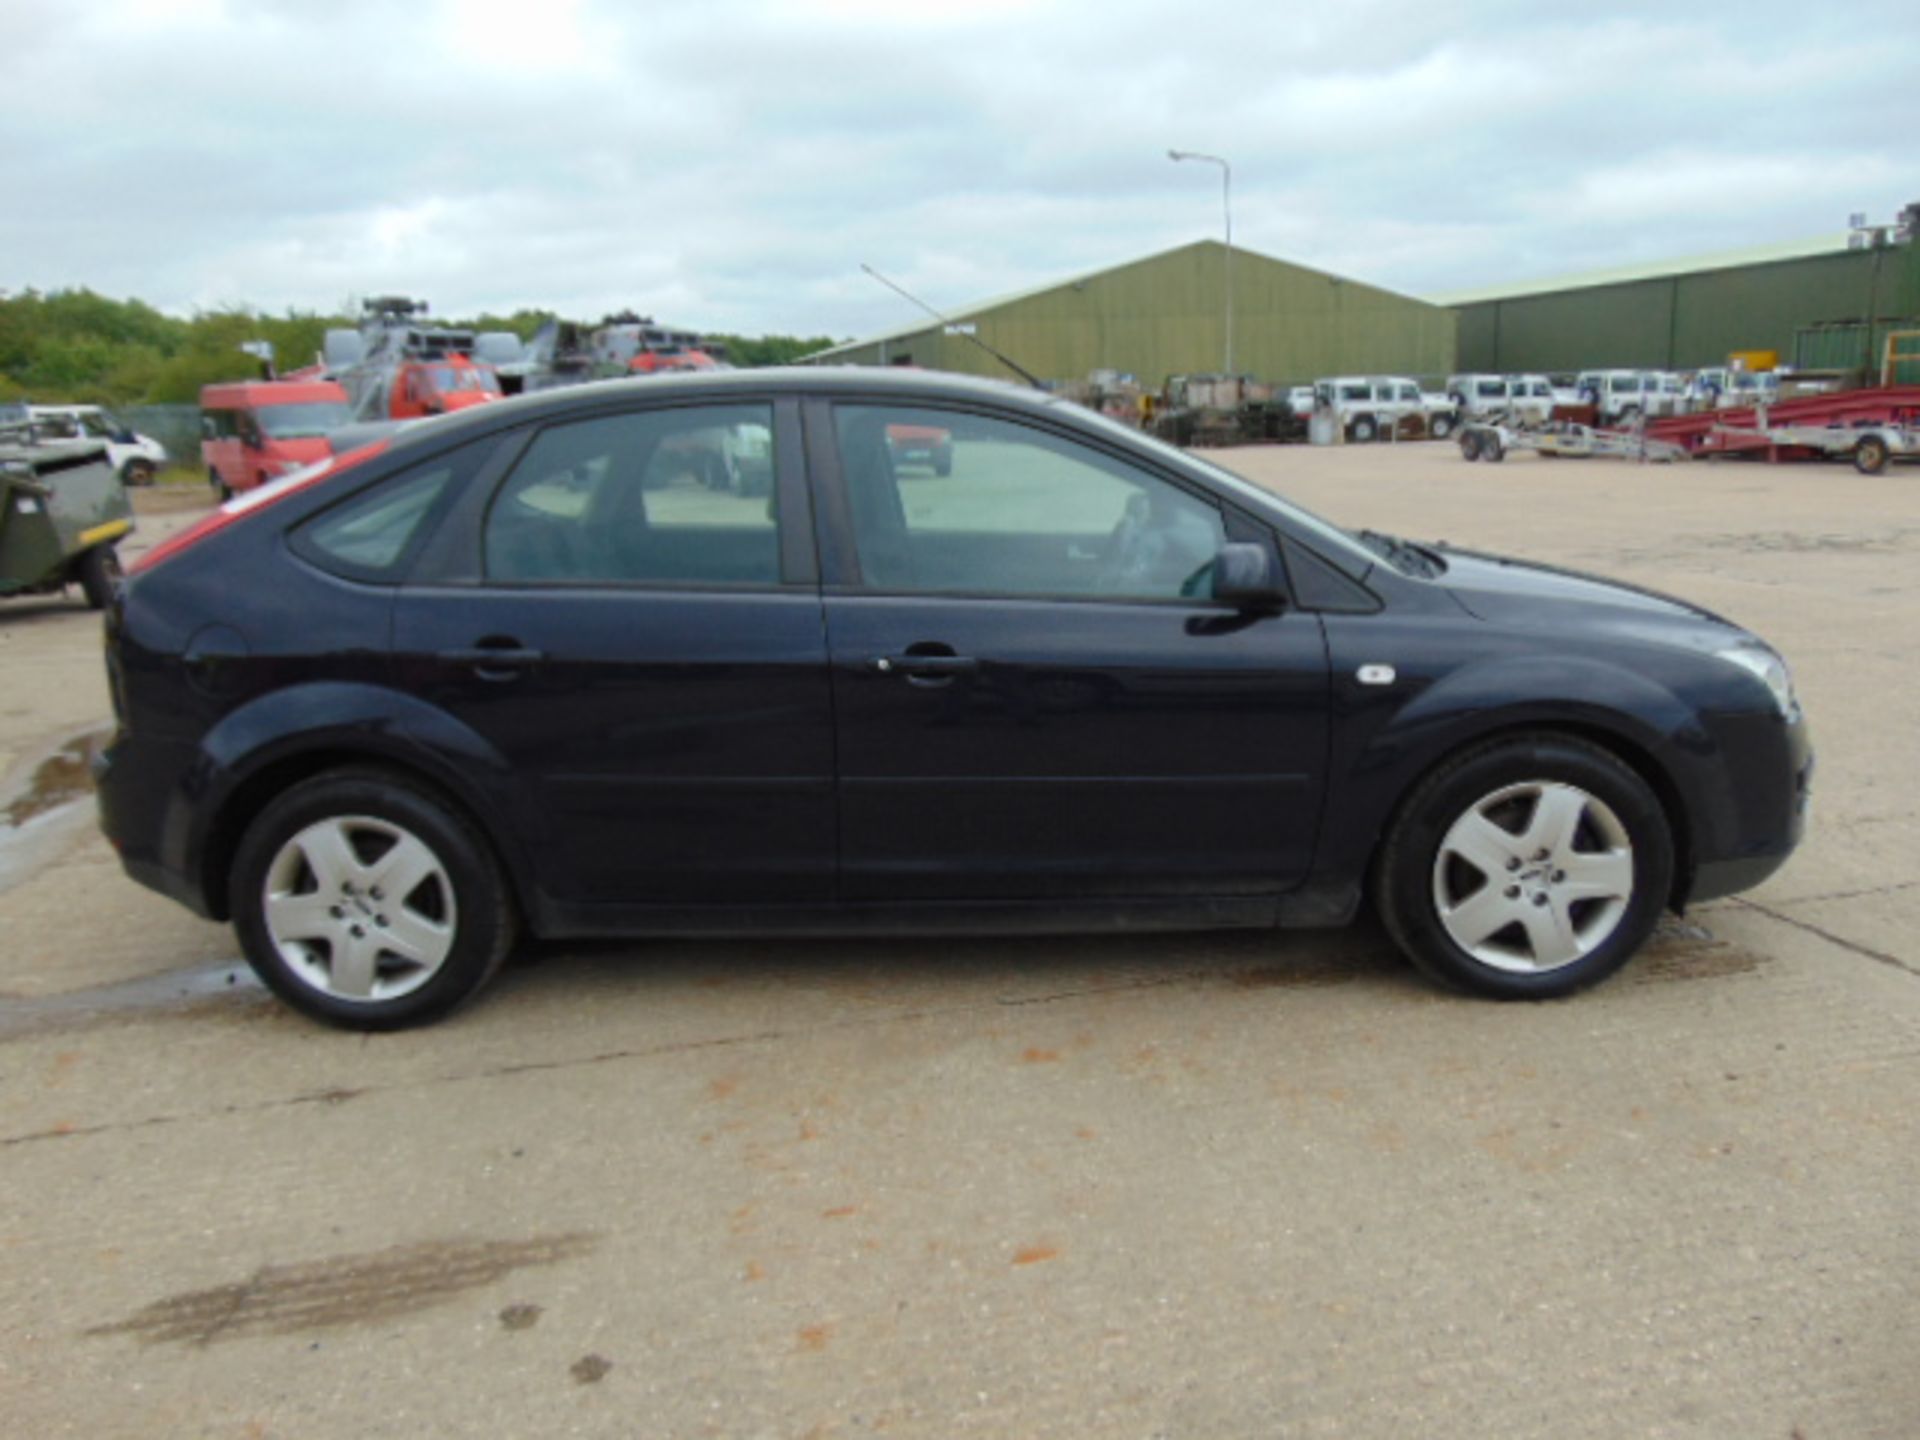 Ford Focus 1.8 TDCI Style Hatchback - Image 5 of 18